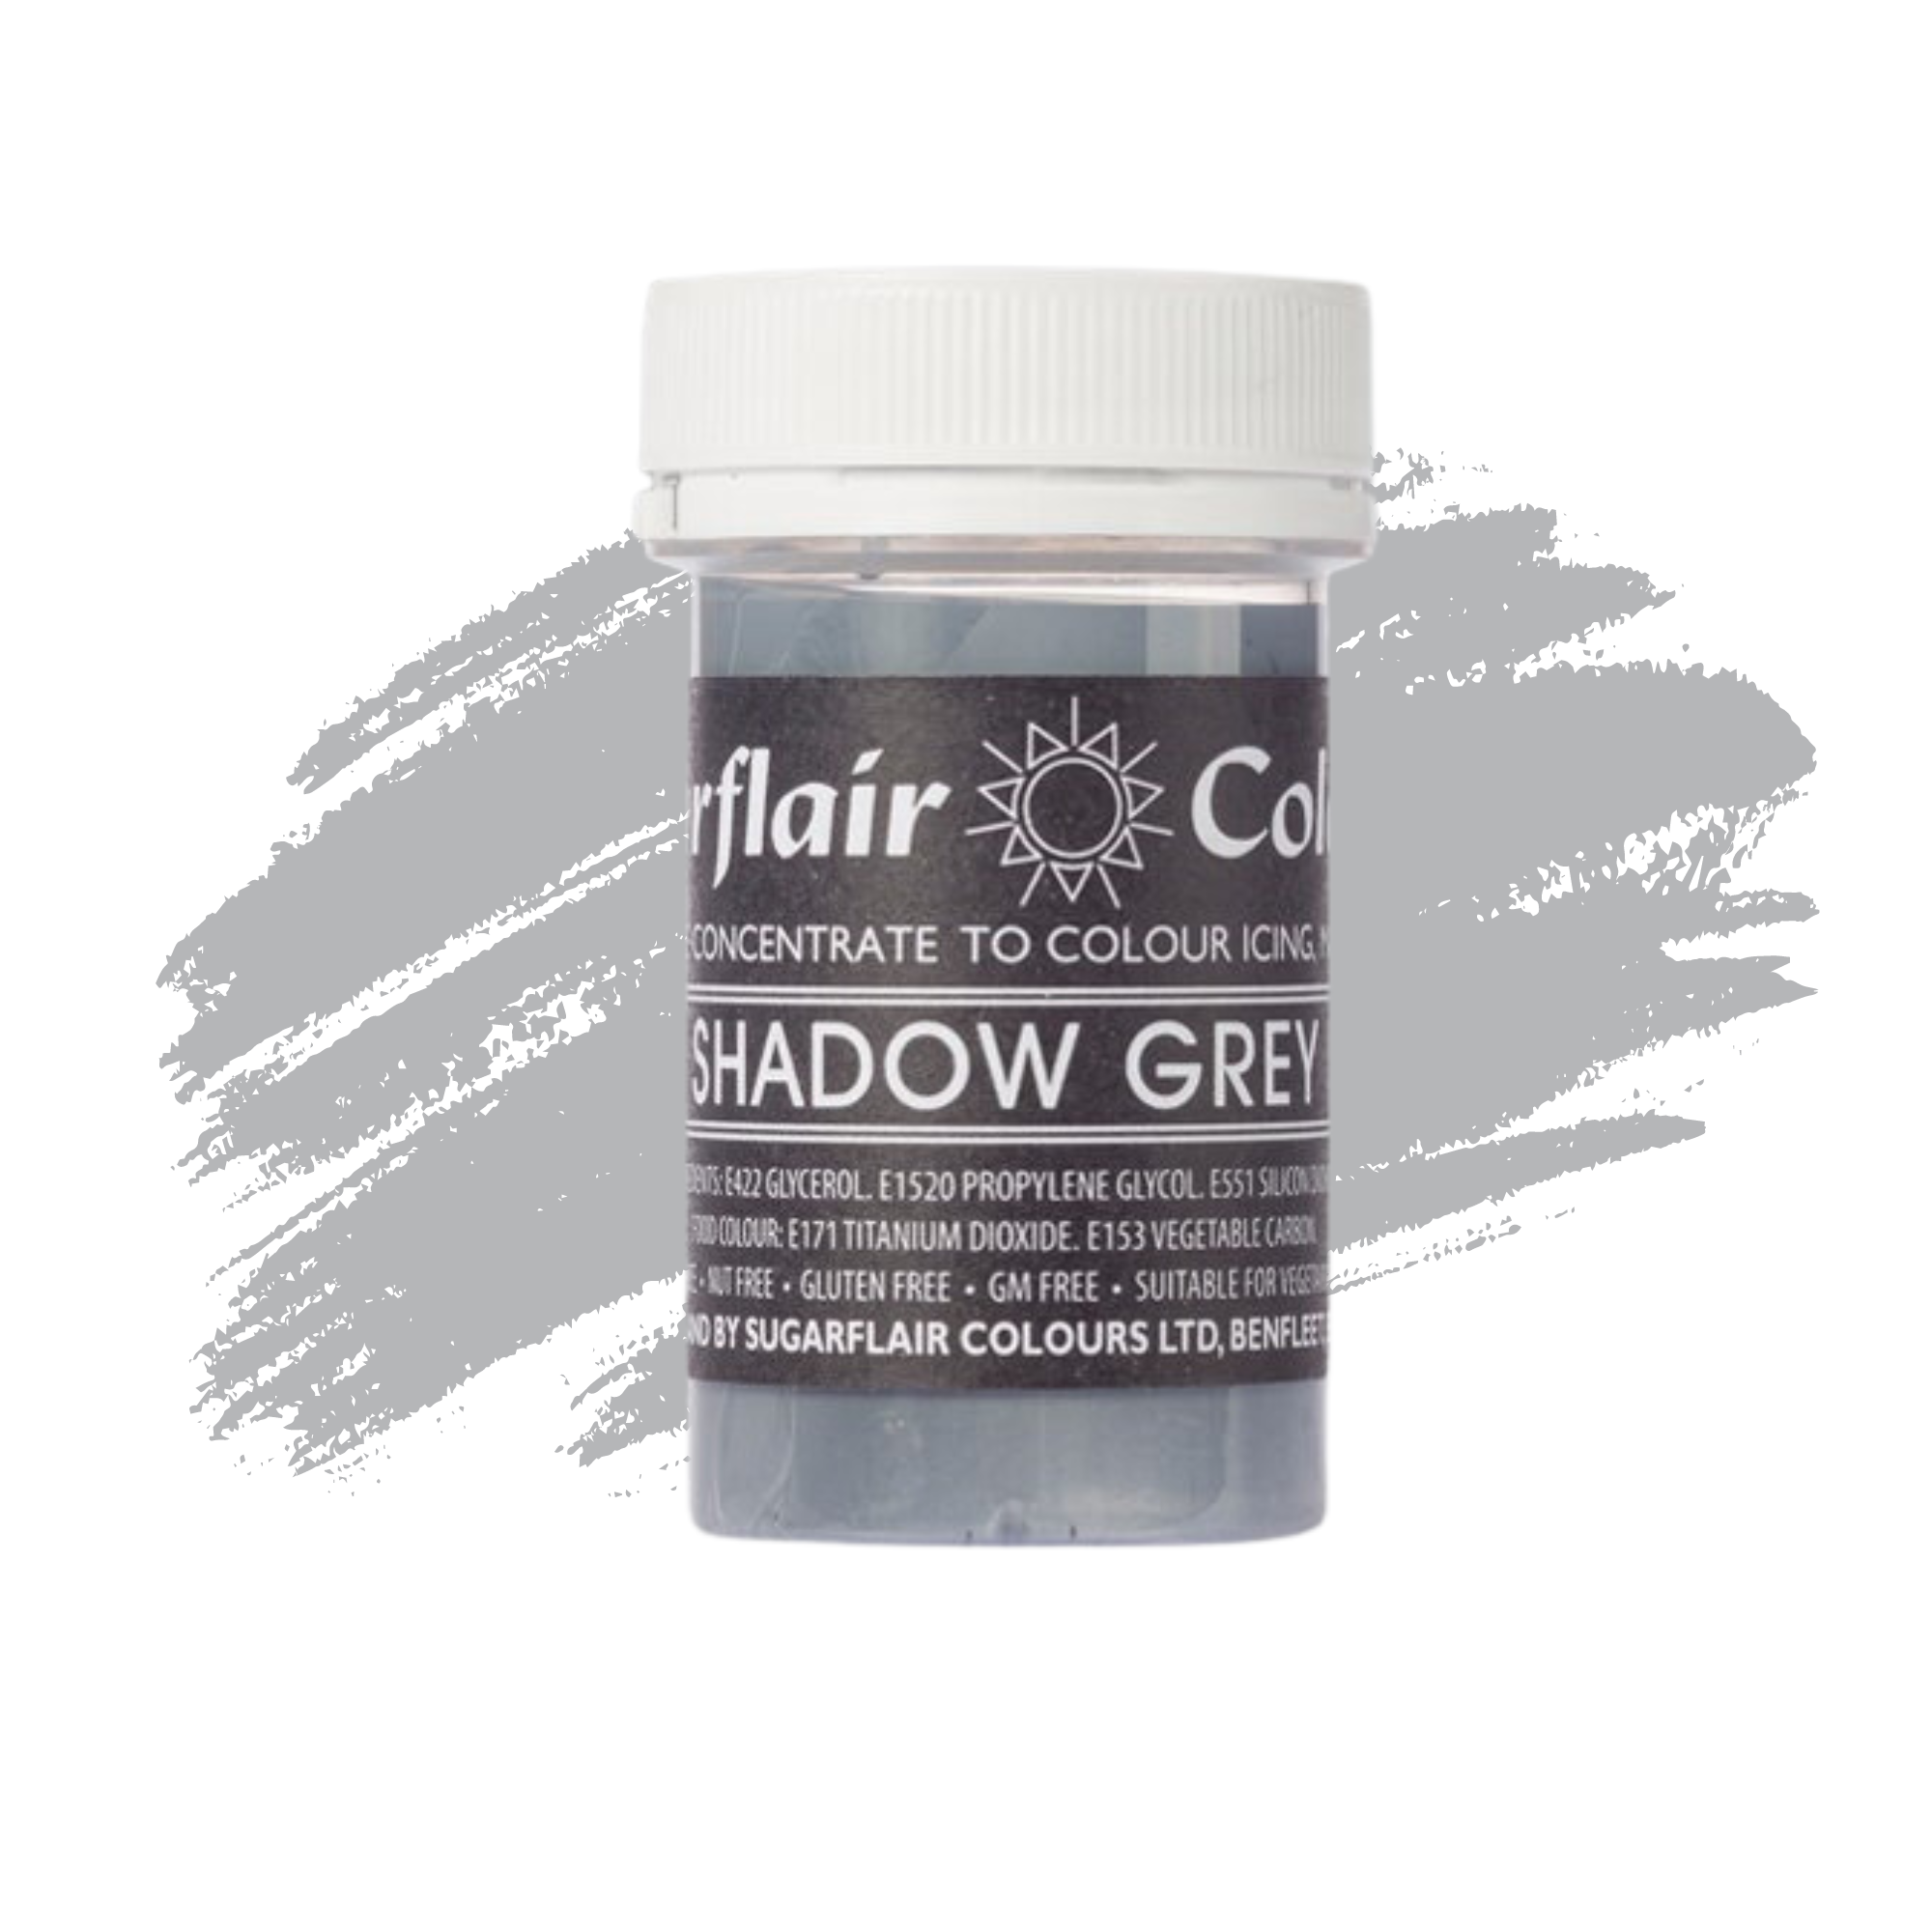 Sugarflair Paste Colours Concentrated Food Colouring - Pastel Shadow Grey - 25g